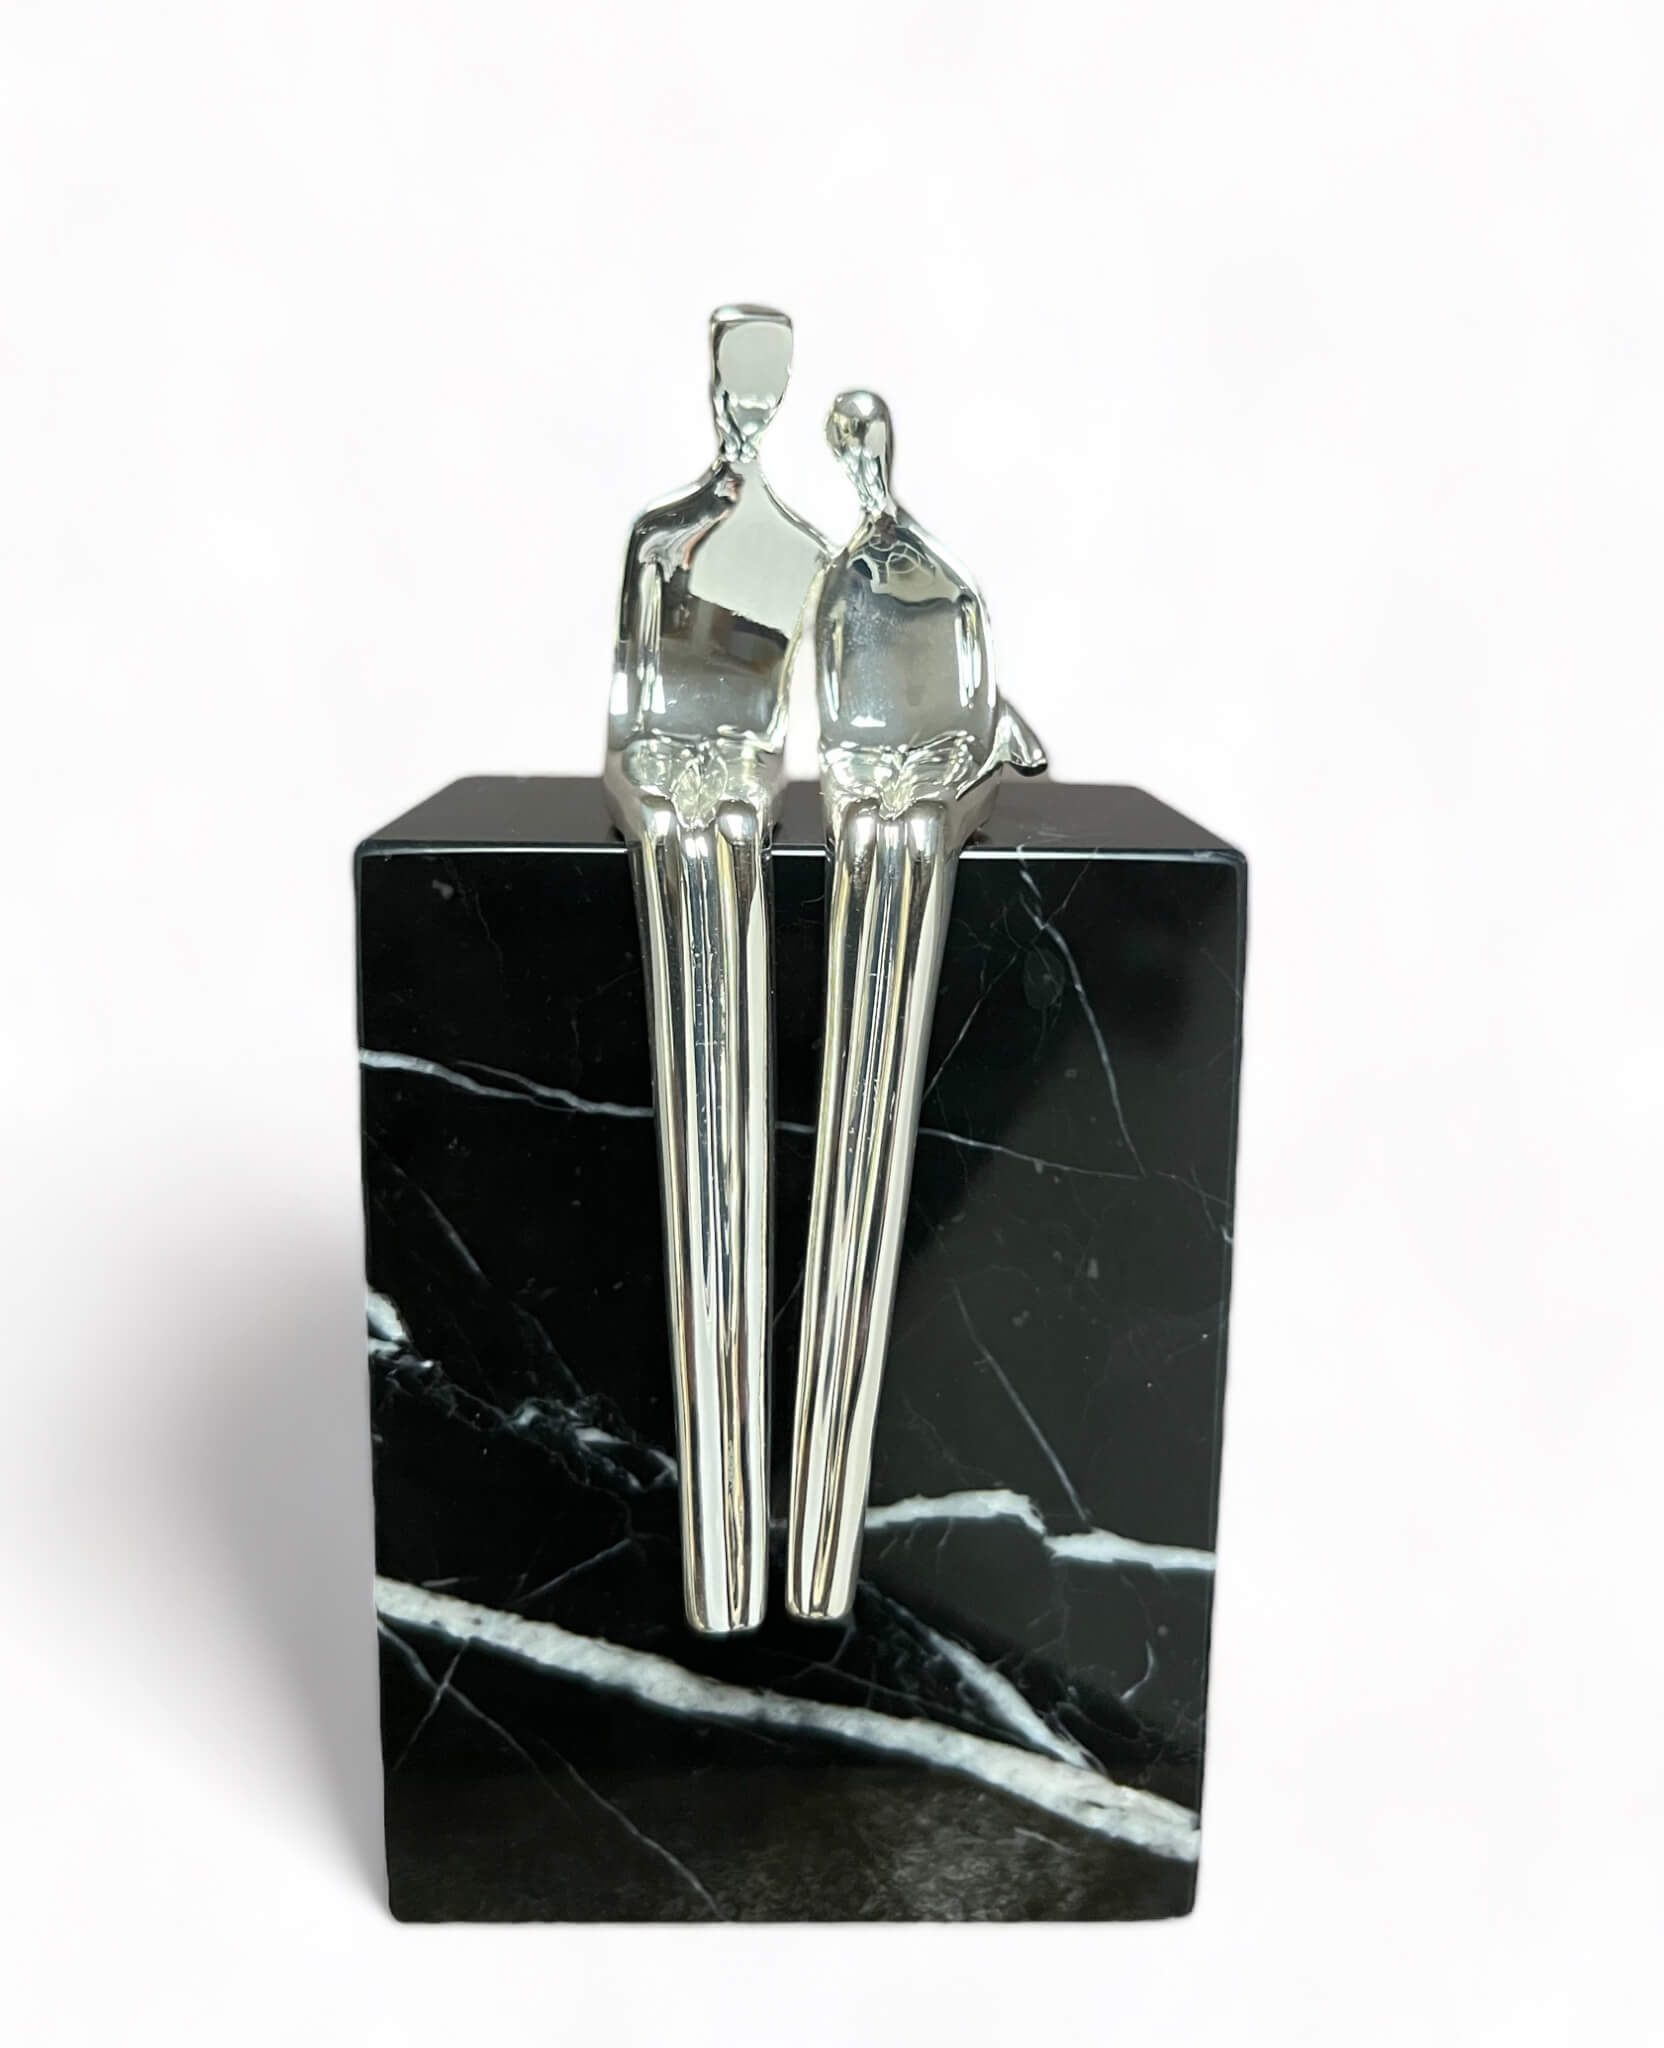 Seated couple sculpture in silver, lovers snuggled together side by side a 25th anniversary gift